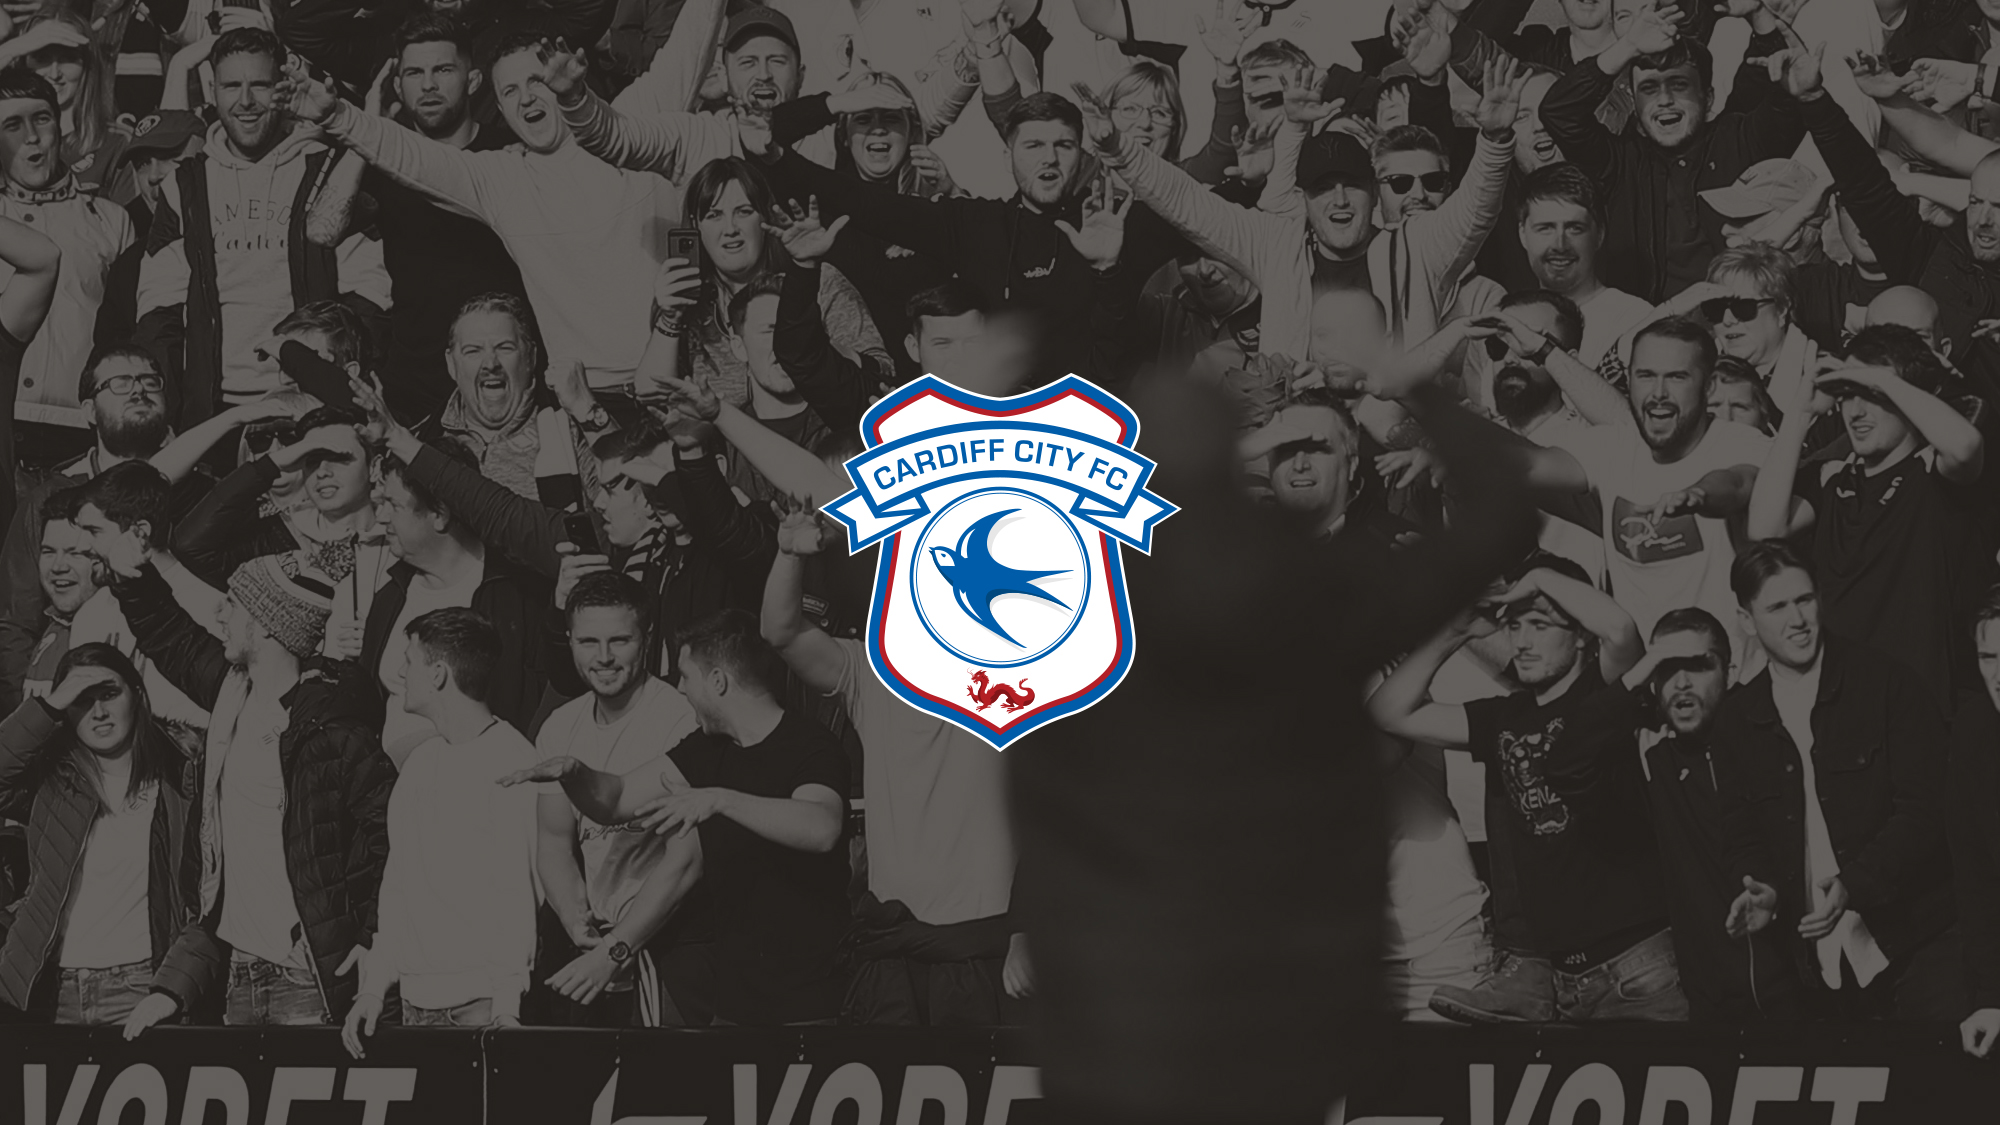 Cardiff away tickets and travel